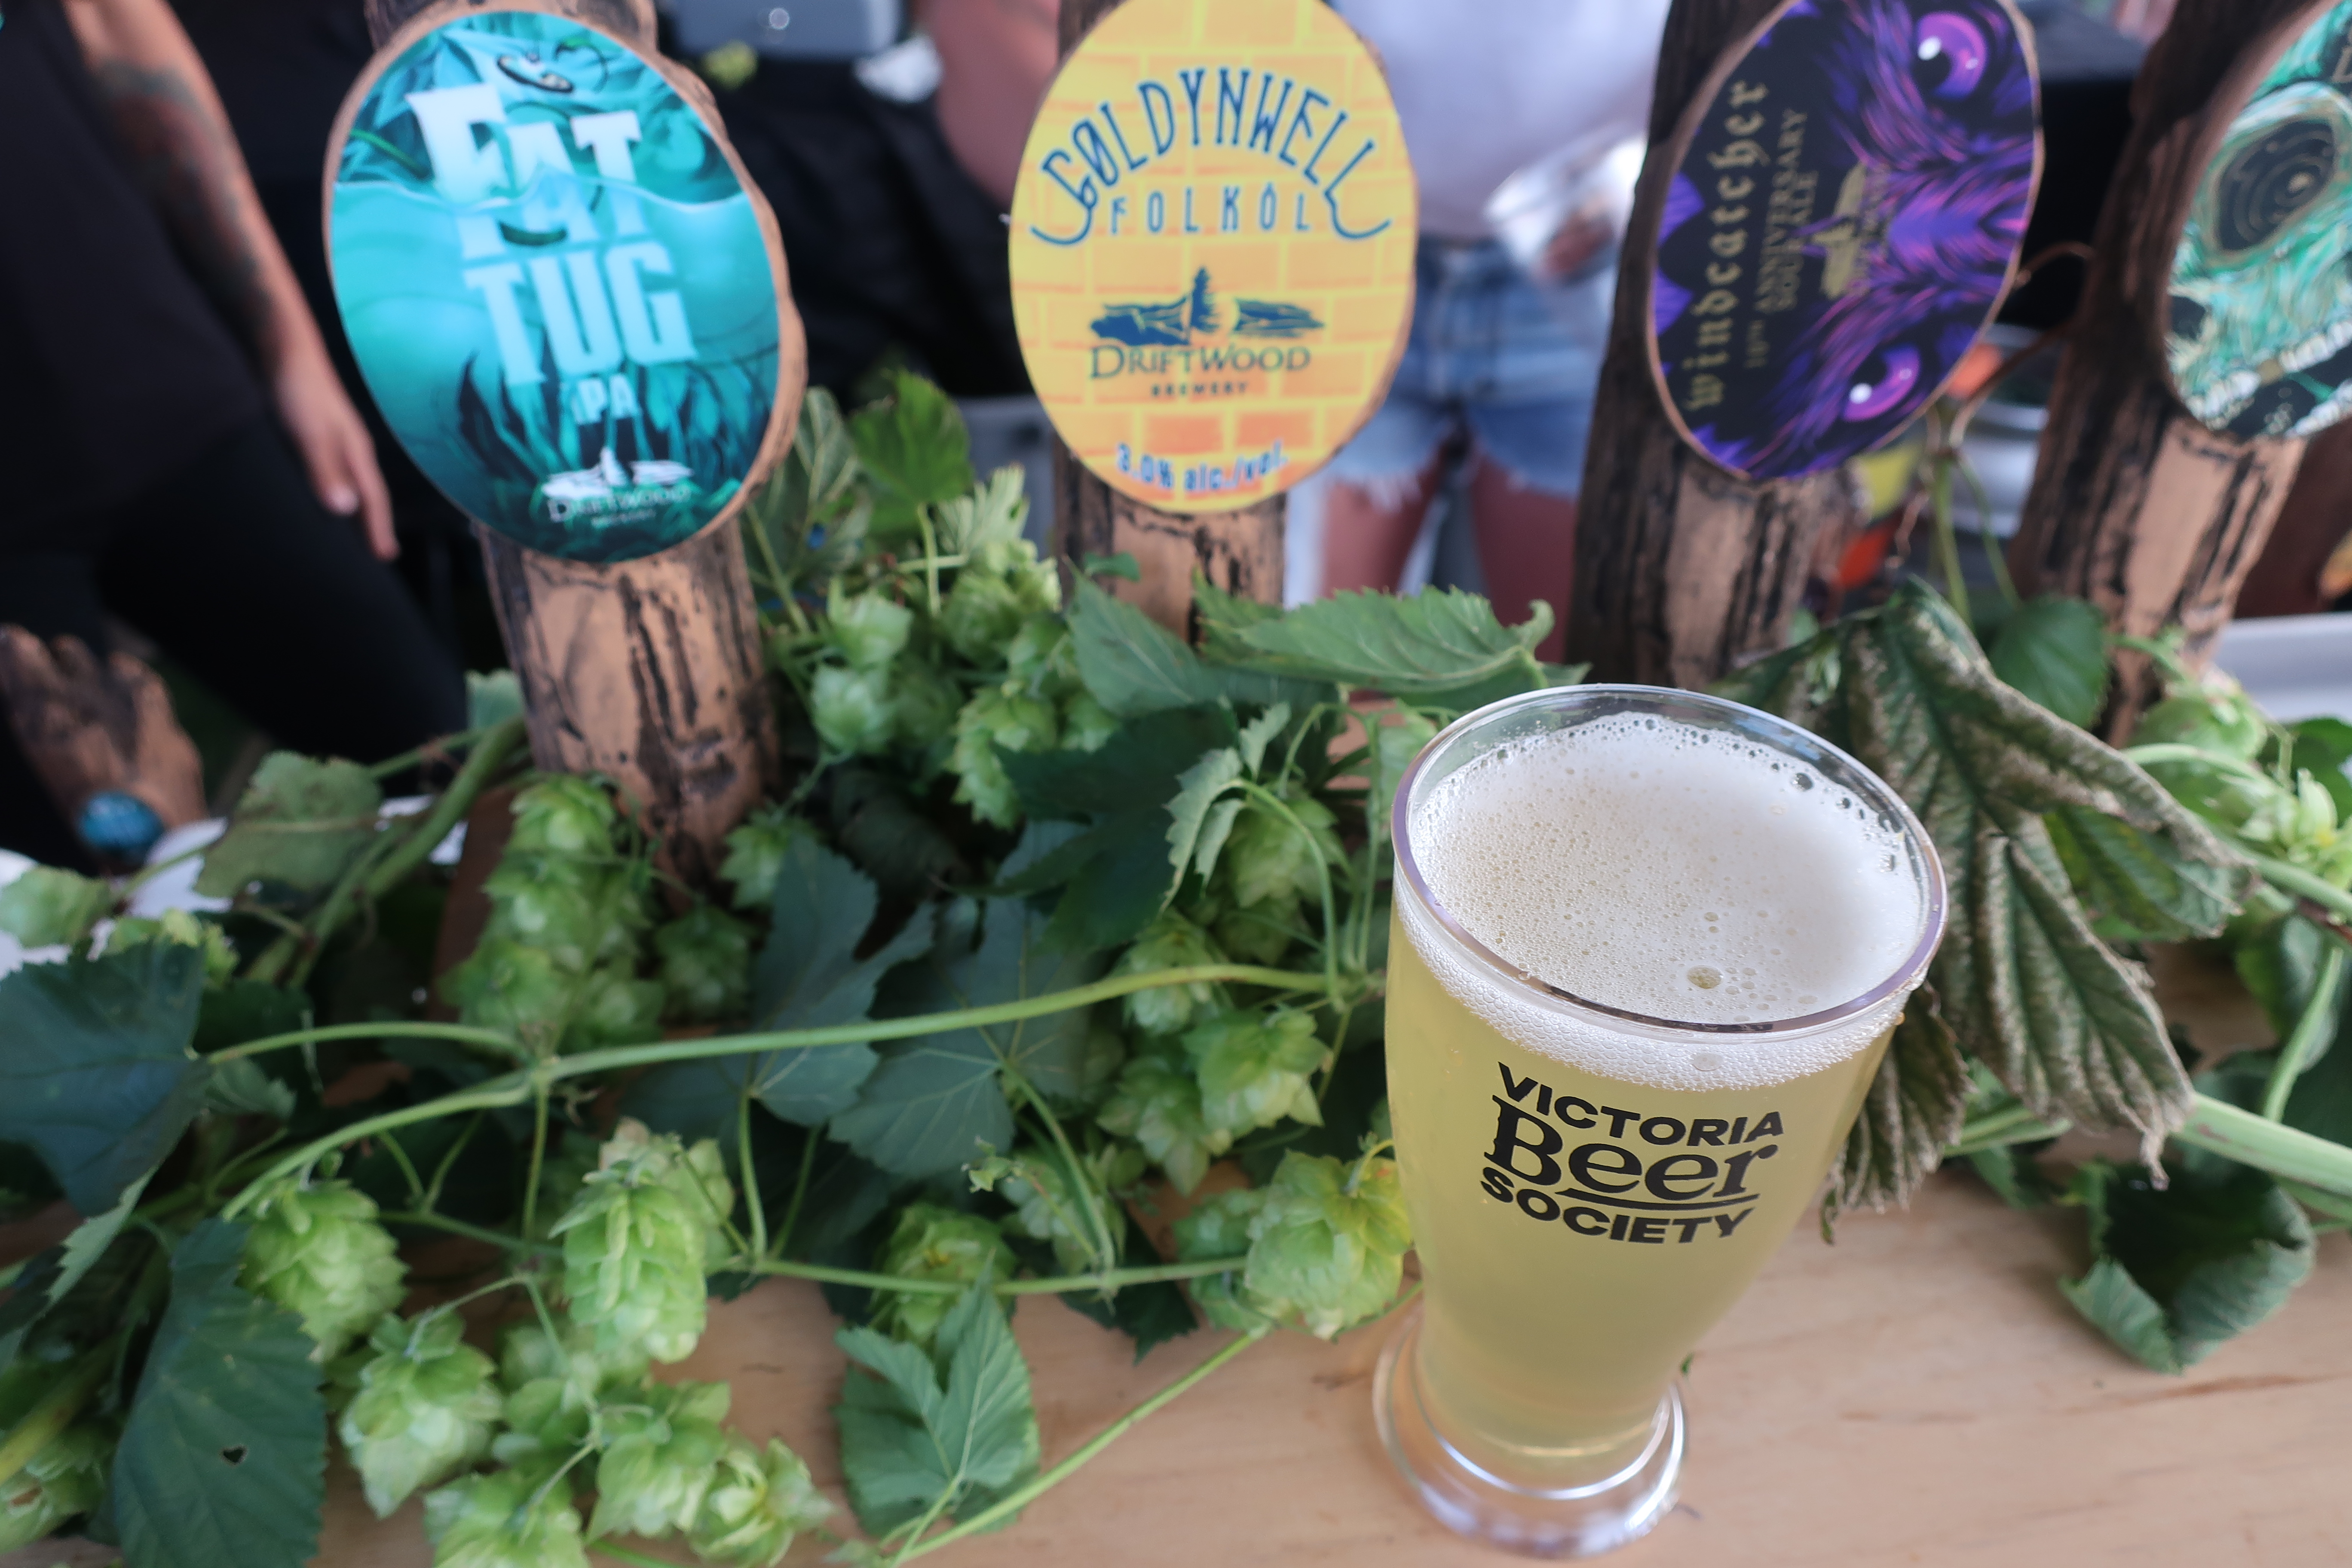 Driftwood Brewing from Victoria, BC served its beers at the 2019 Great Canadian Beer Festival.